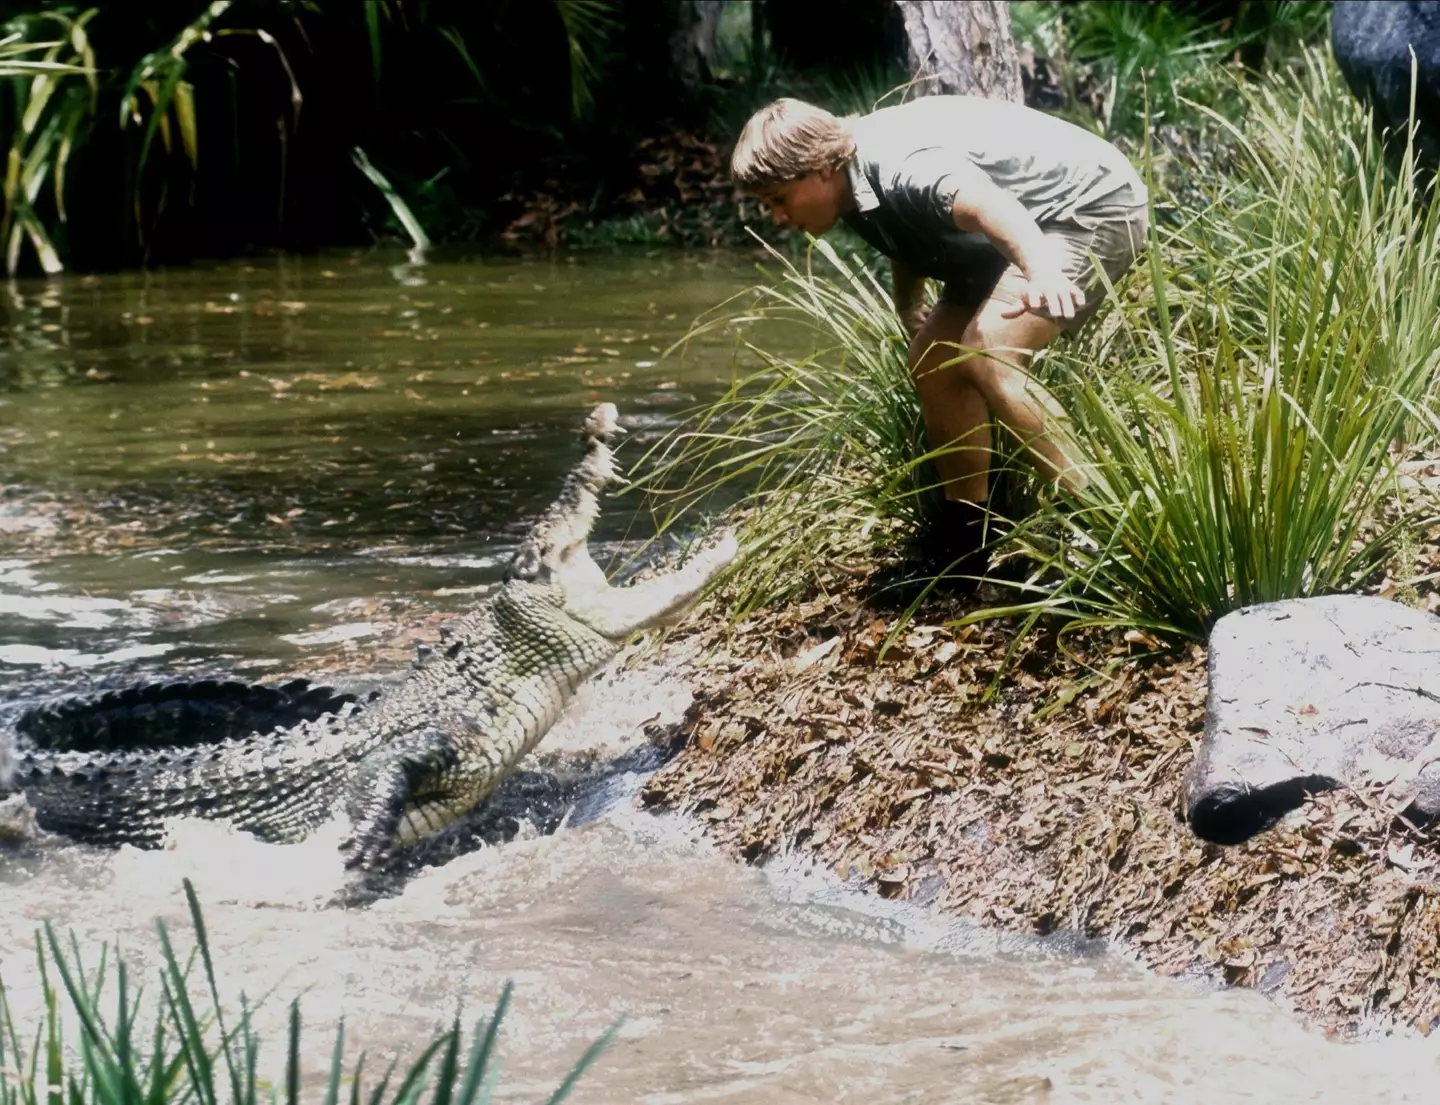 Irwin was the manager of Australia Zoo from 1991 until his death in 2006.